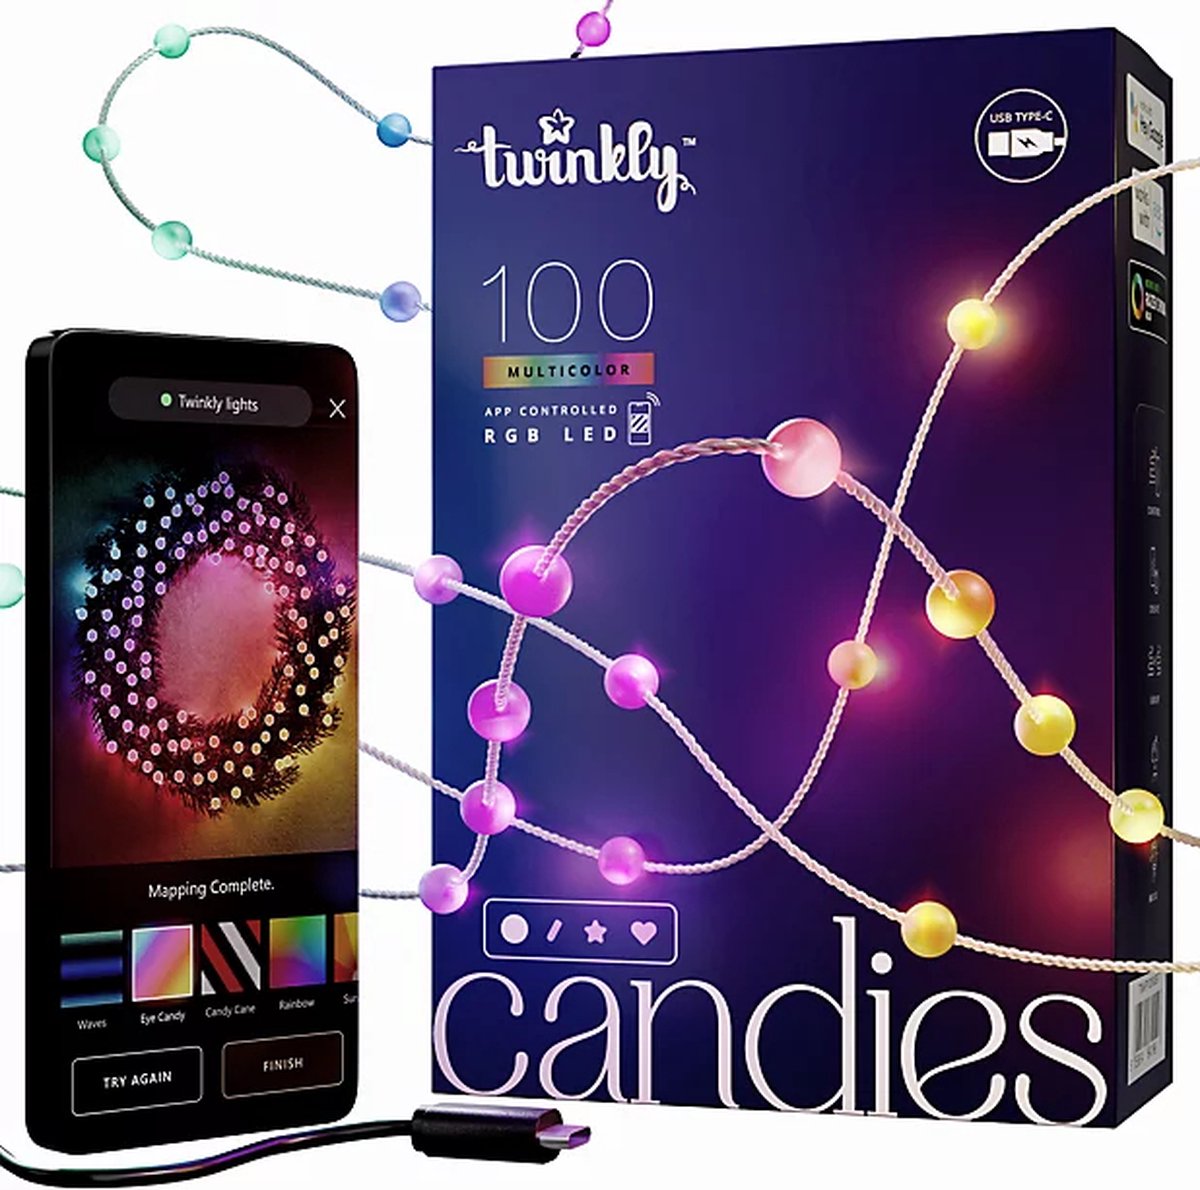 Twinkly Candies Lichtsnoer Pearl RGB Verlichtingsdecoratie 100 RGB LED s 6 meter Transparant